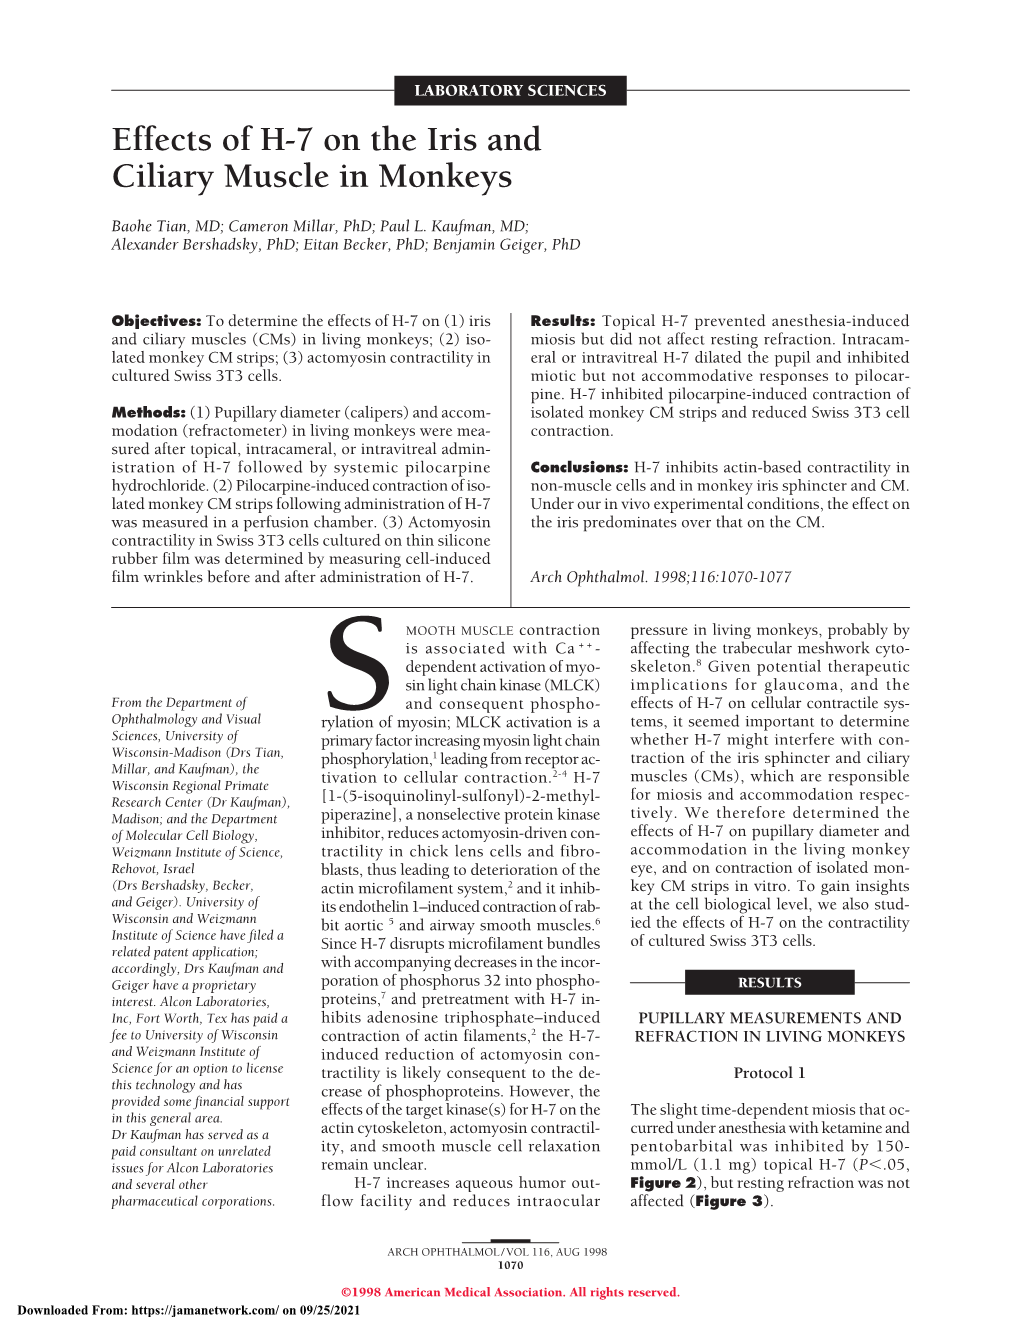 Effects of H-7 on the Iris and Ciliary Muscle in Monkeys